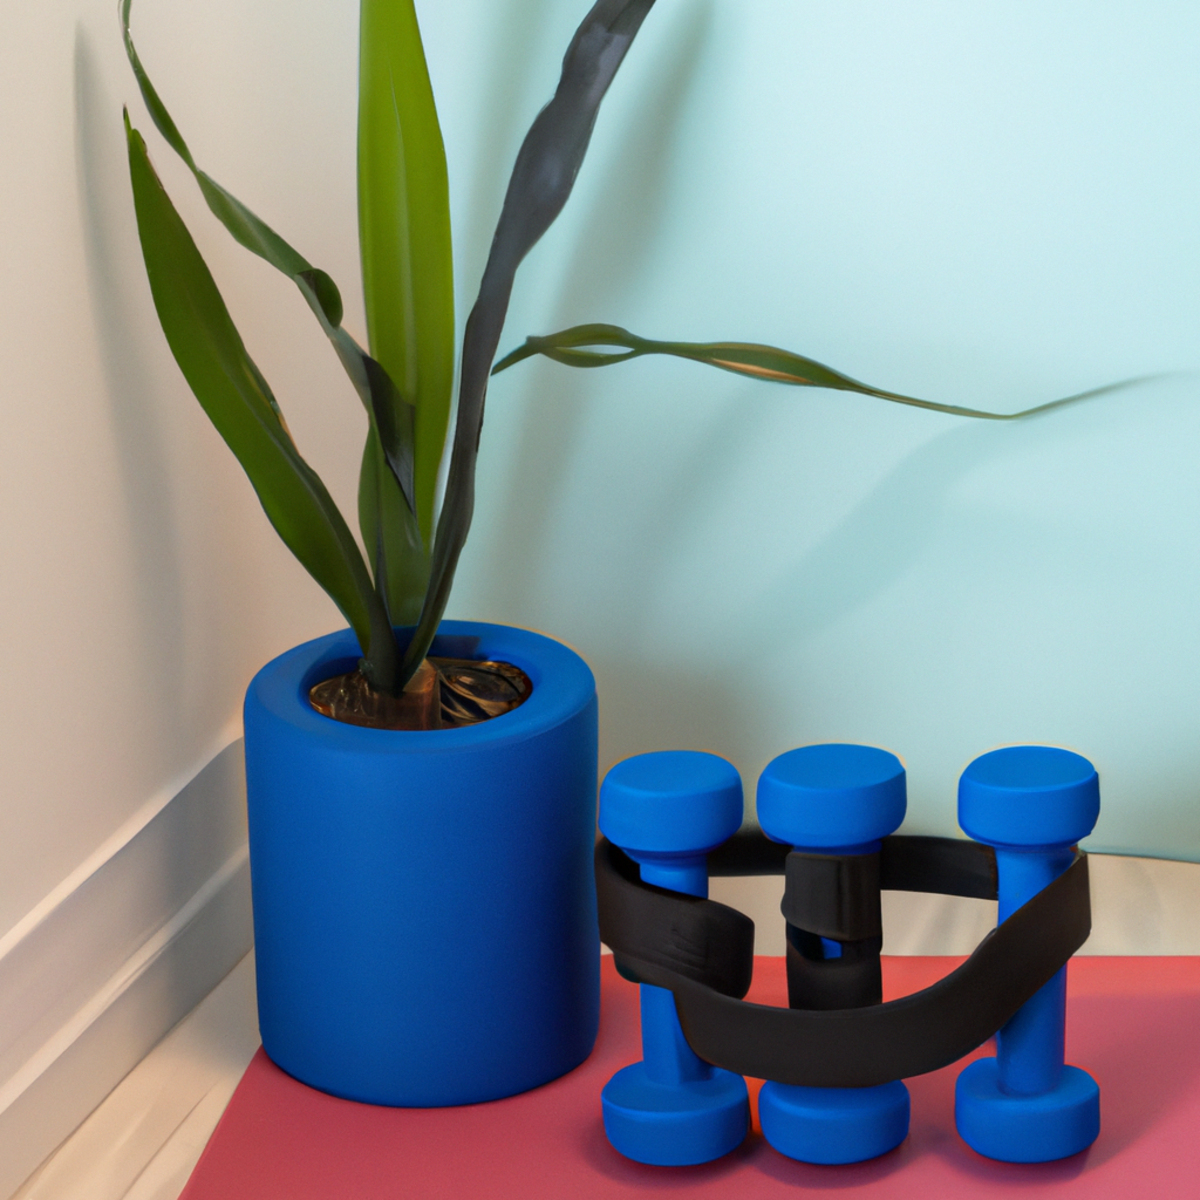 The photo shows a set of dumbbells placed on a yoga mat, with a resistance band looped around them. The background is a neutral-colored wall, with a small potted plant in the corner. The dumbbells are of moderate weight, with rubberized grips for easy handling. The resistance band is a bright blue color, with handles on each end. The overall composition of the photo is clean and simple, with a focus on the objects that seniors can use for resistance training.